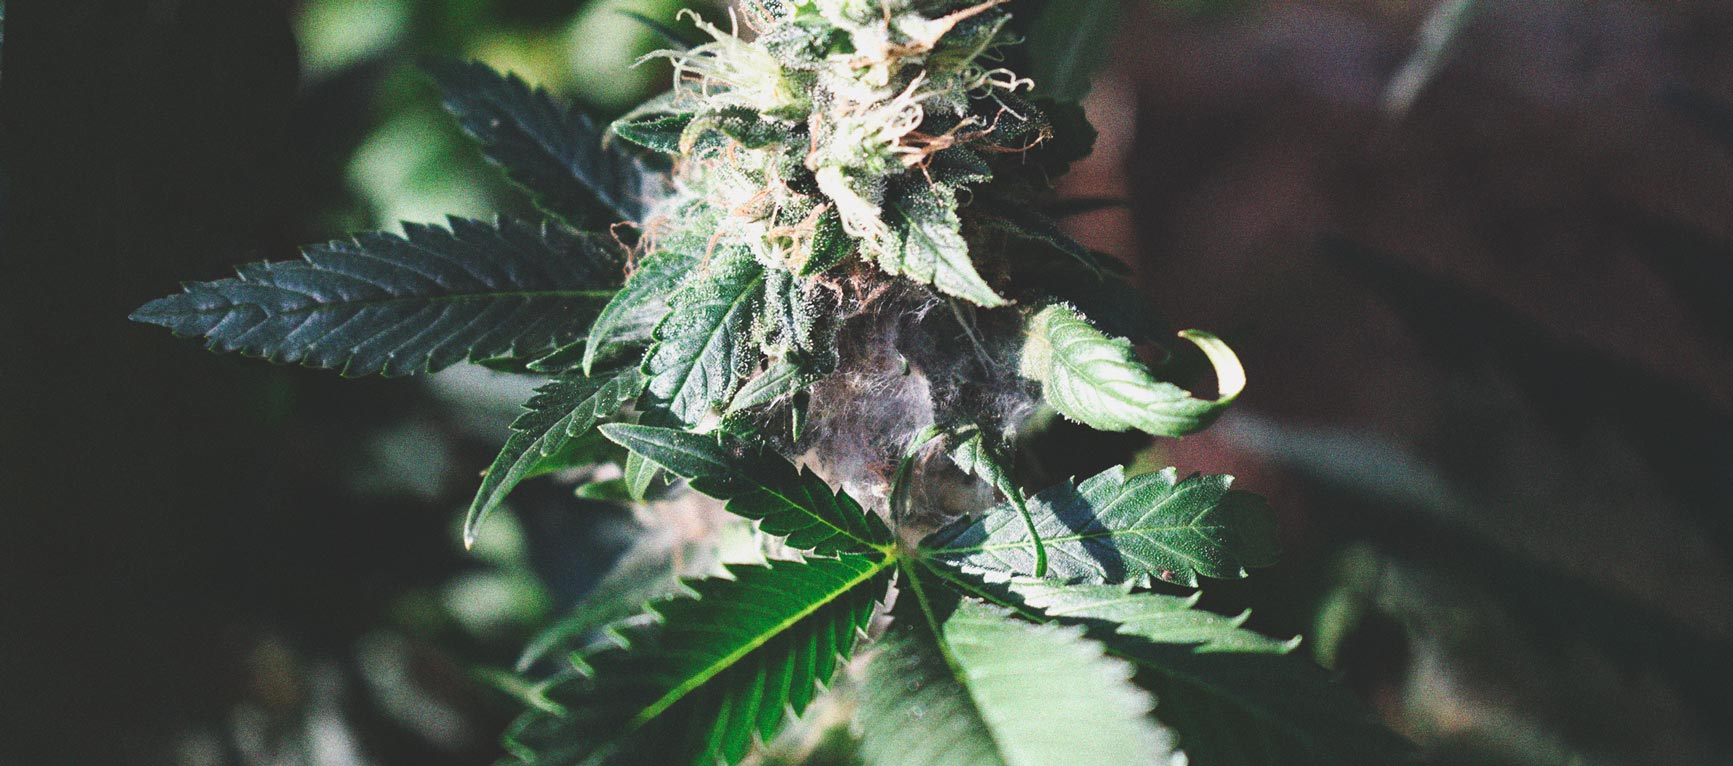 How To Detect Moldy Weed When You’re Growing